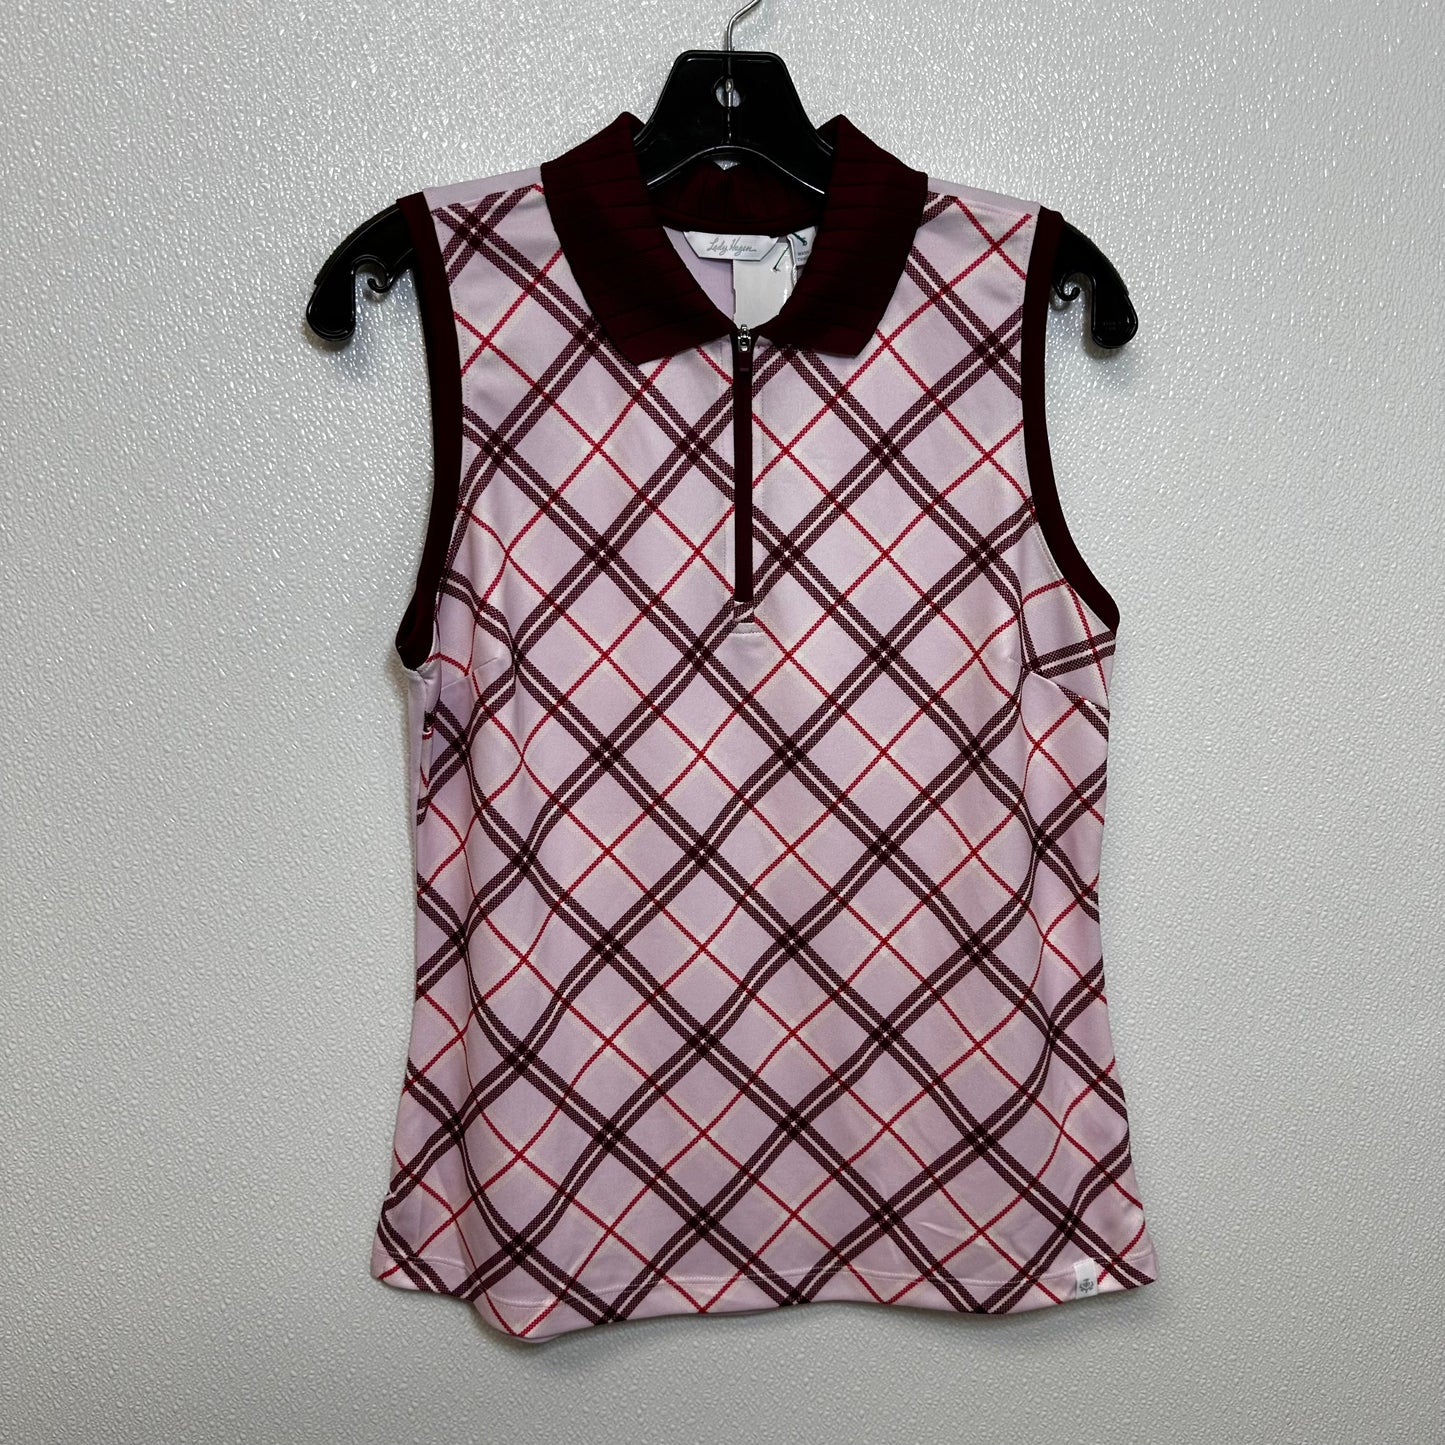 Maroon Athletic Tank Top Clothes Mentor, Size S